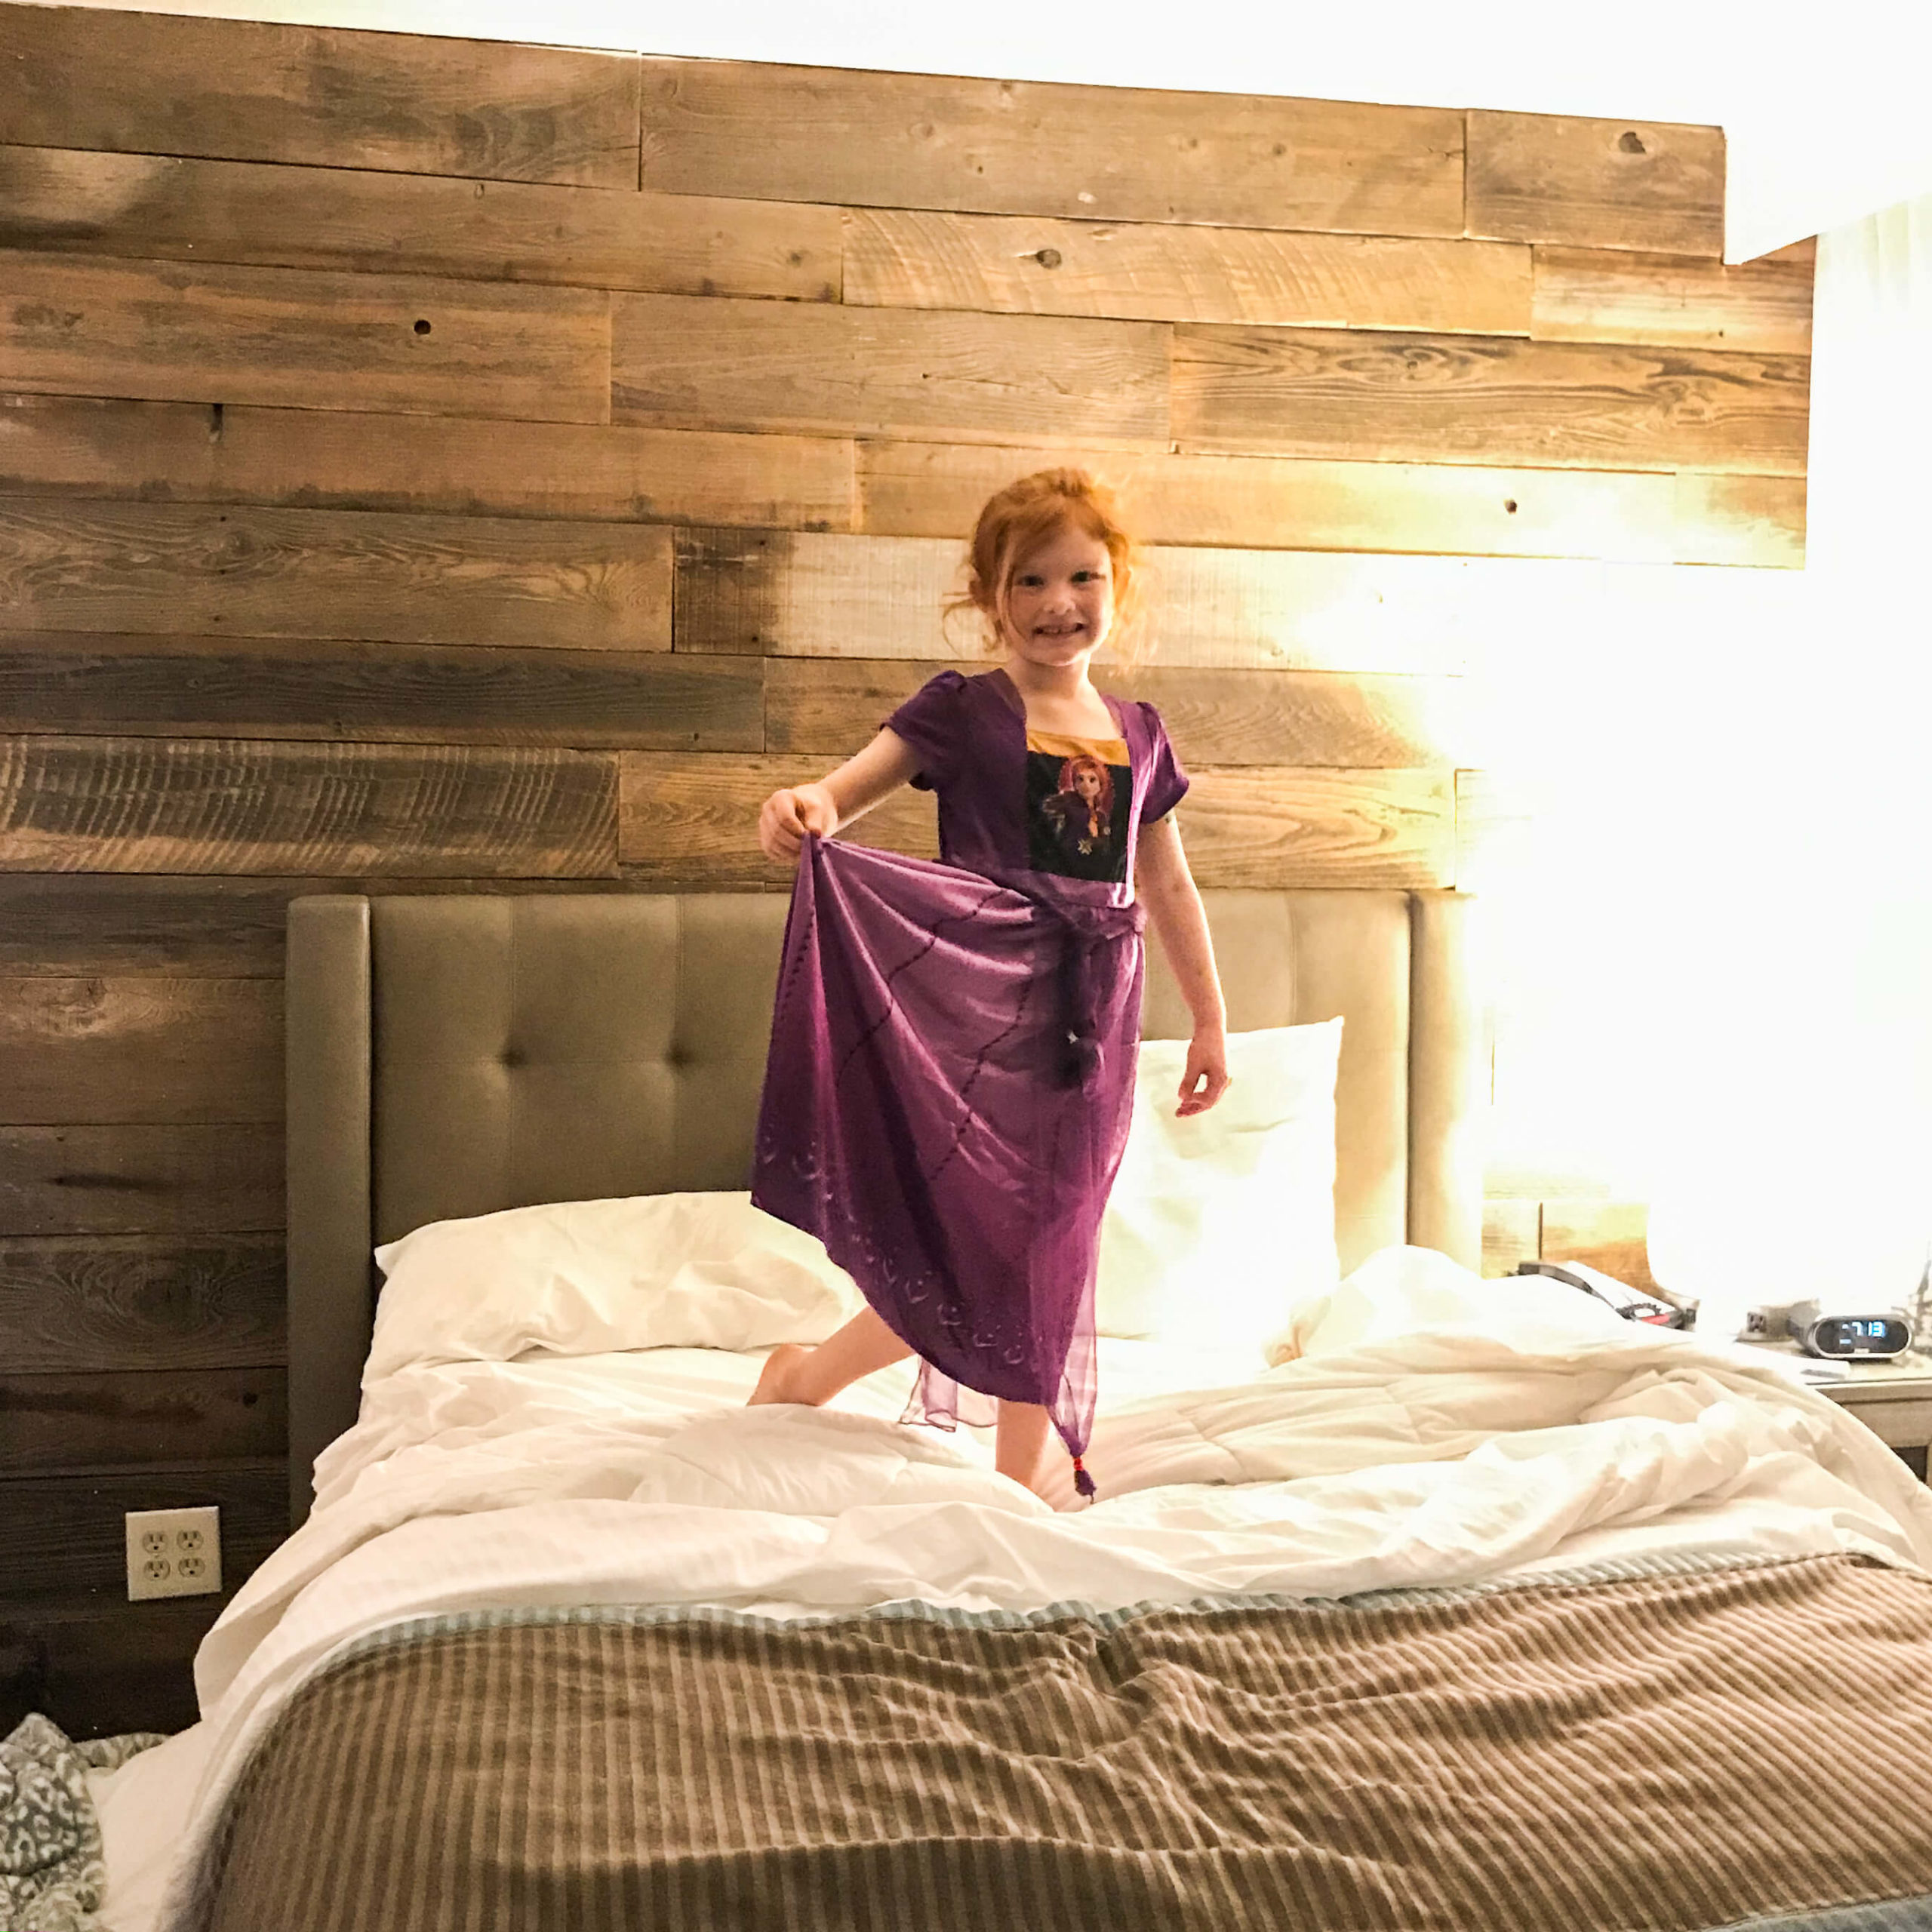 A little girl in a princess nightgown standing on a bed.